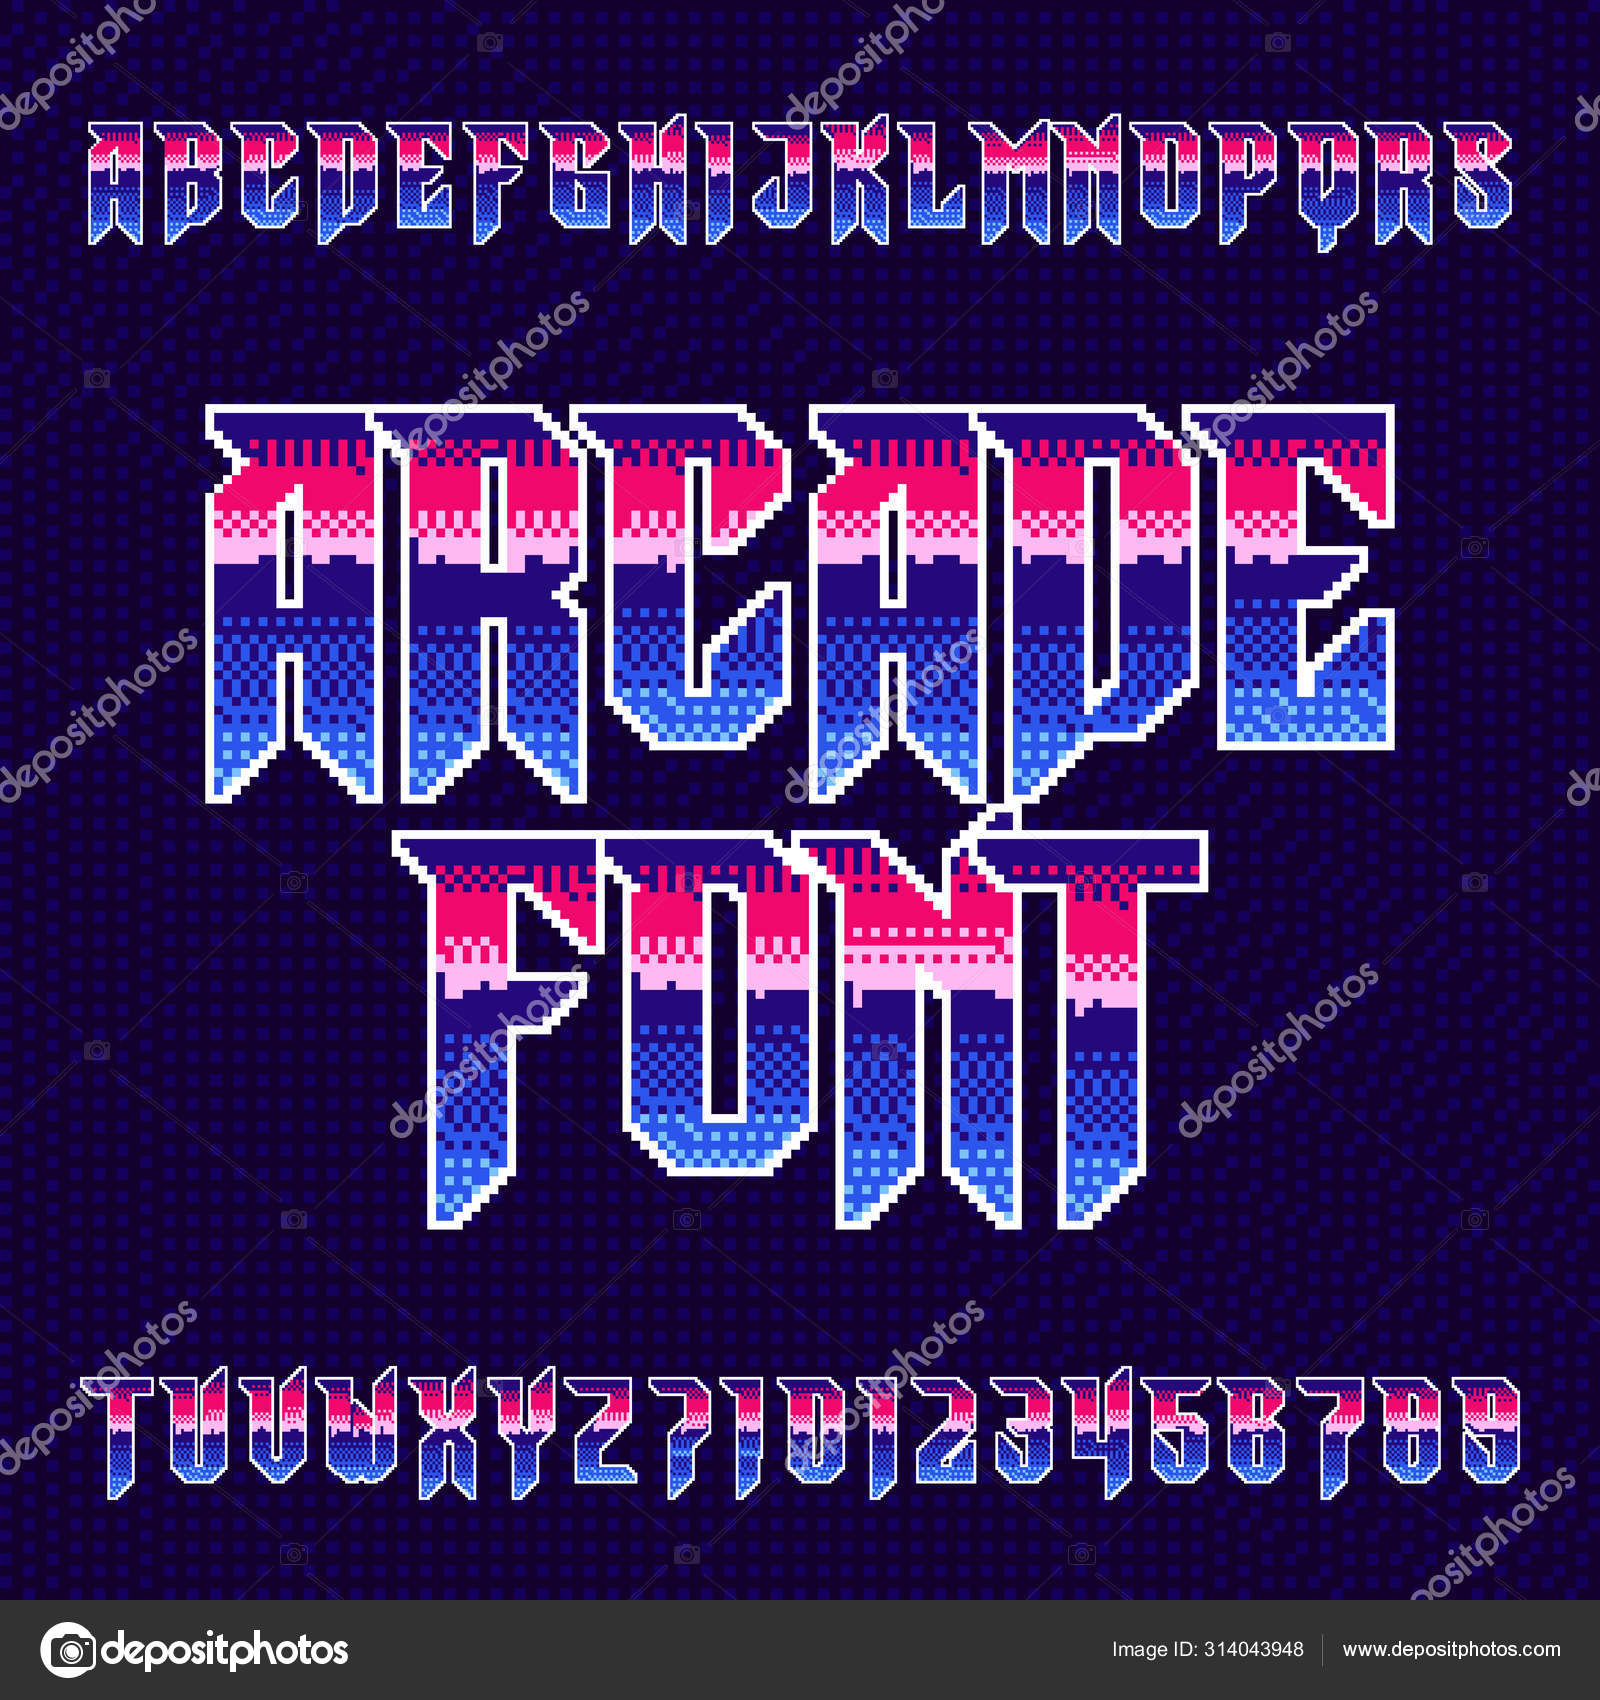 Retro style arcade games font. 80s video game alphabet letters and numbers  royalty free illustration